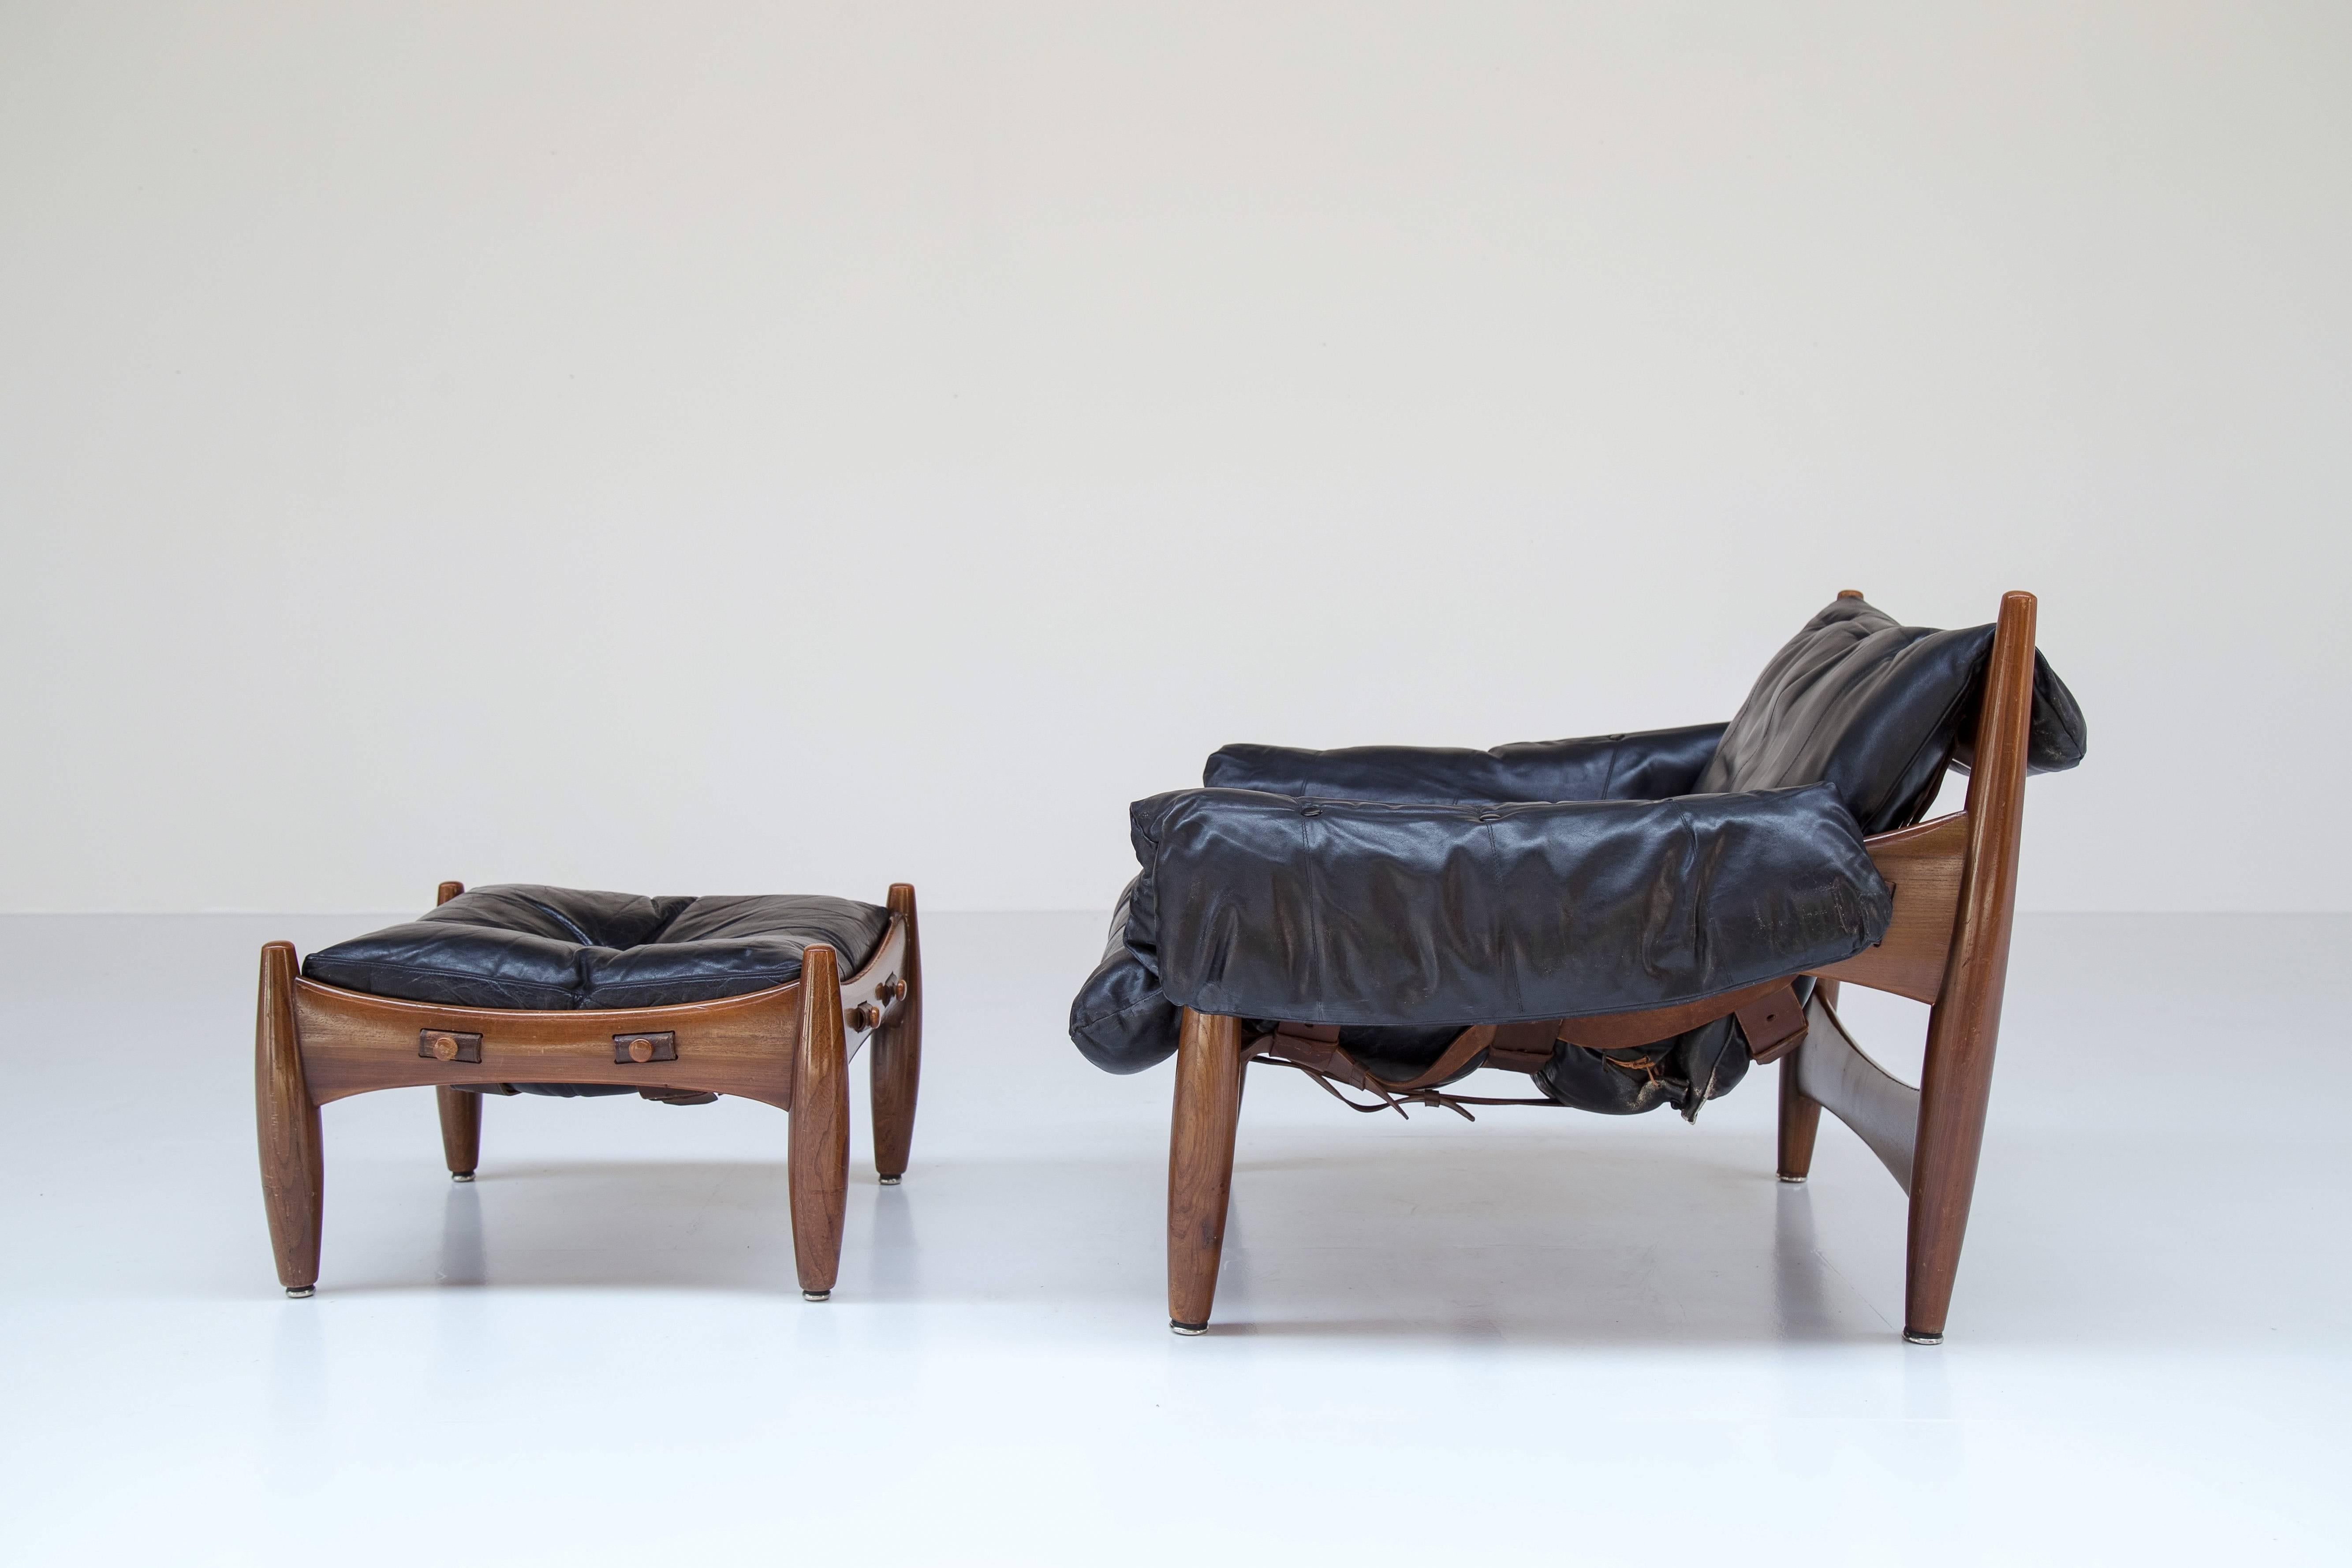 'Sheriff' lounge chair and ottoman, in rosewood and leather by Sergio Rodrigues for ISA, Italy, 1961.

Comfortable and wide lounge chair by Brazilian designer Sergio Rodriques. This chair breaths the characteristics of Brazilian modern furniture